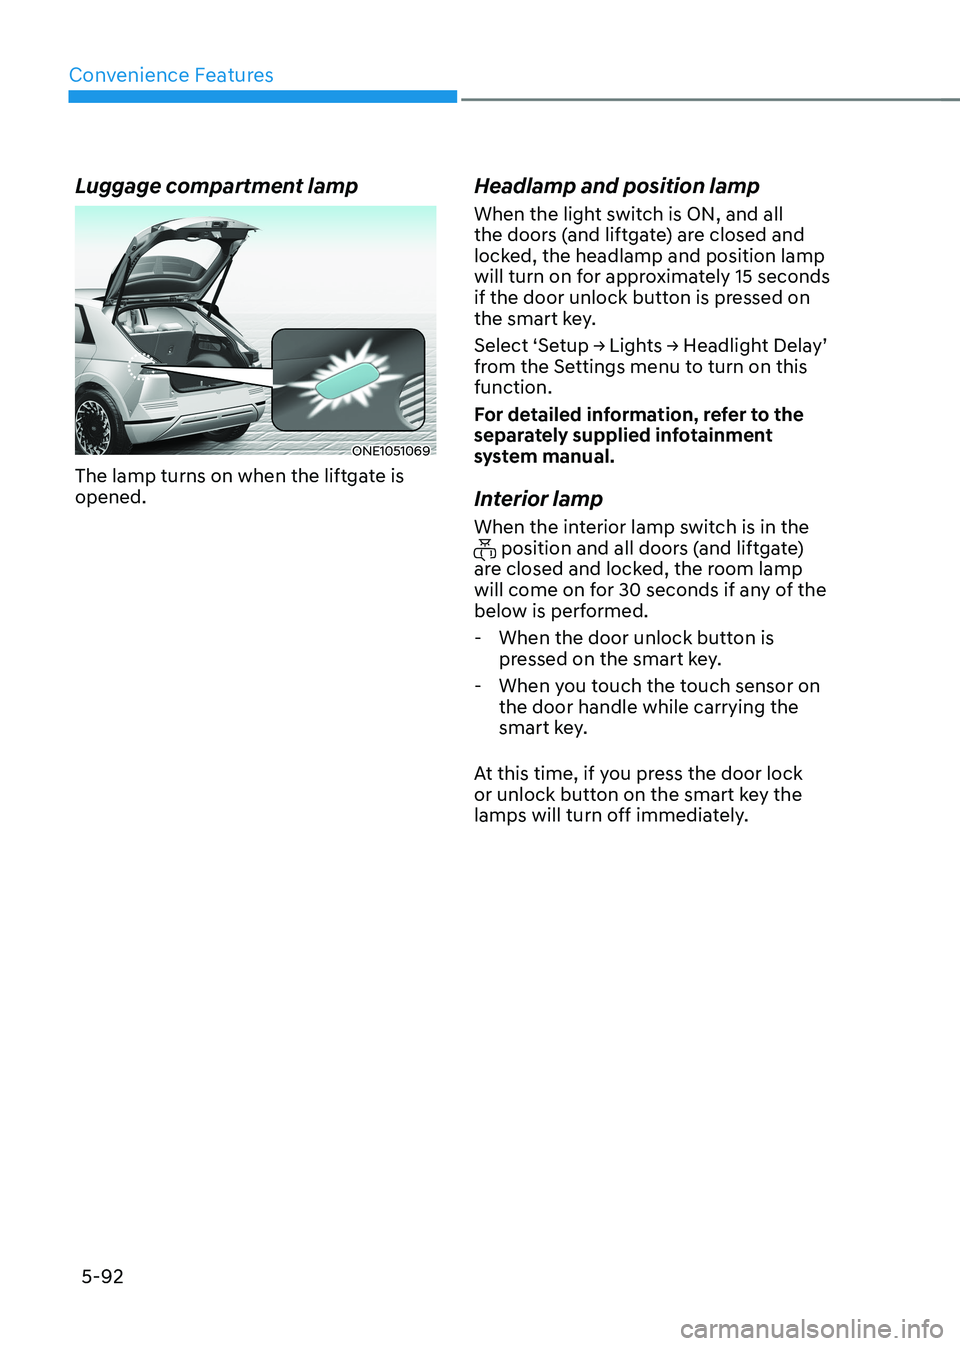 HYUNDAI IONIQ 5 2023  Owners Manual Convenience Features
5-92
Luggage compartment lamp
ONE1051069
The lamp turns on when the liftgate is  opened. Headlamp and position lamp 
When the light switch is ON, and all  
the doors (and liftgate